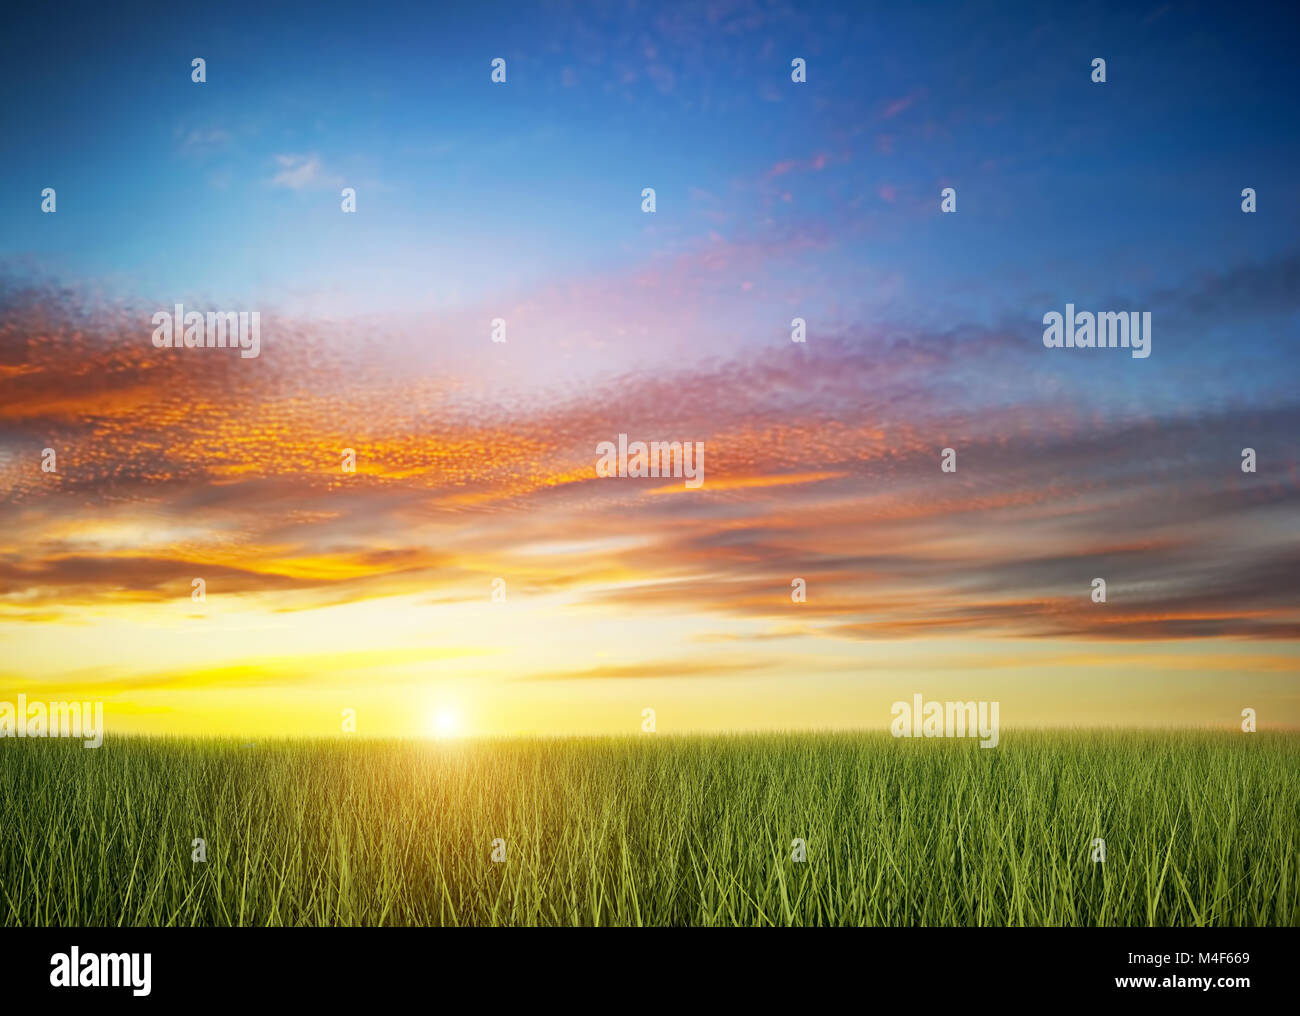 Green grass field under colorful sunset sky. Stock Photo